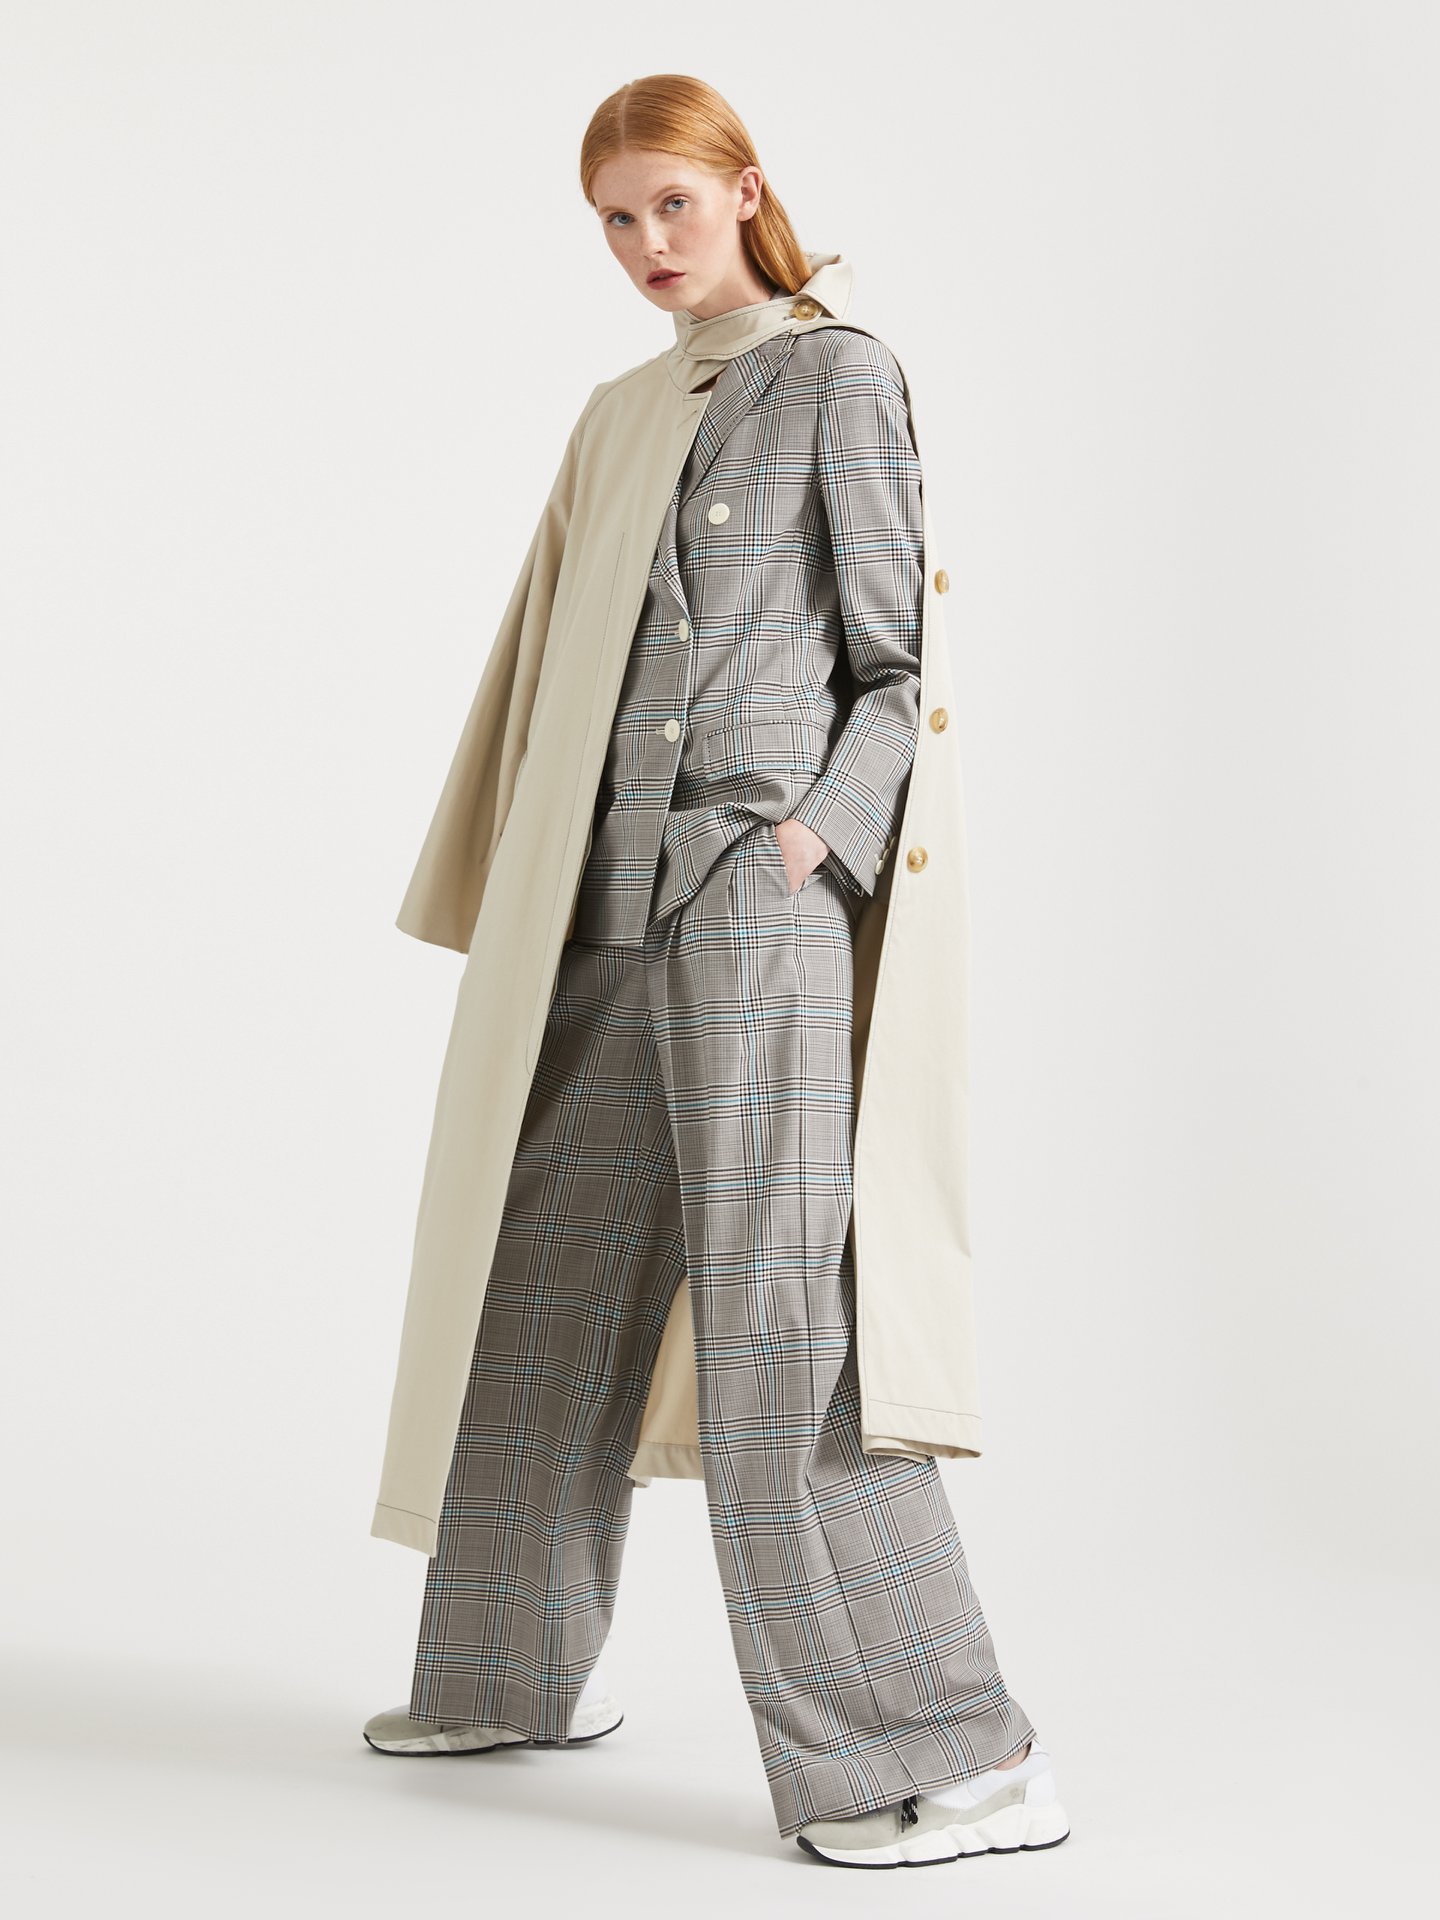 Relaxed suiting meets the modern trench coat - a fresh take on tailoring fit for any season. Anchor this easygoing look with sleek trainers. Discover the new Spring Summer 2020 collection in-store and online. 